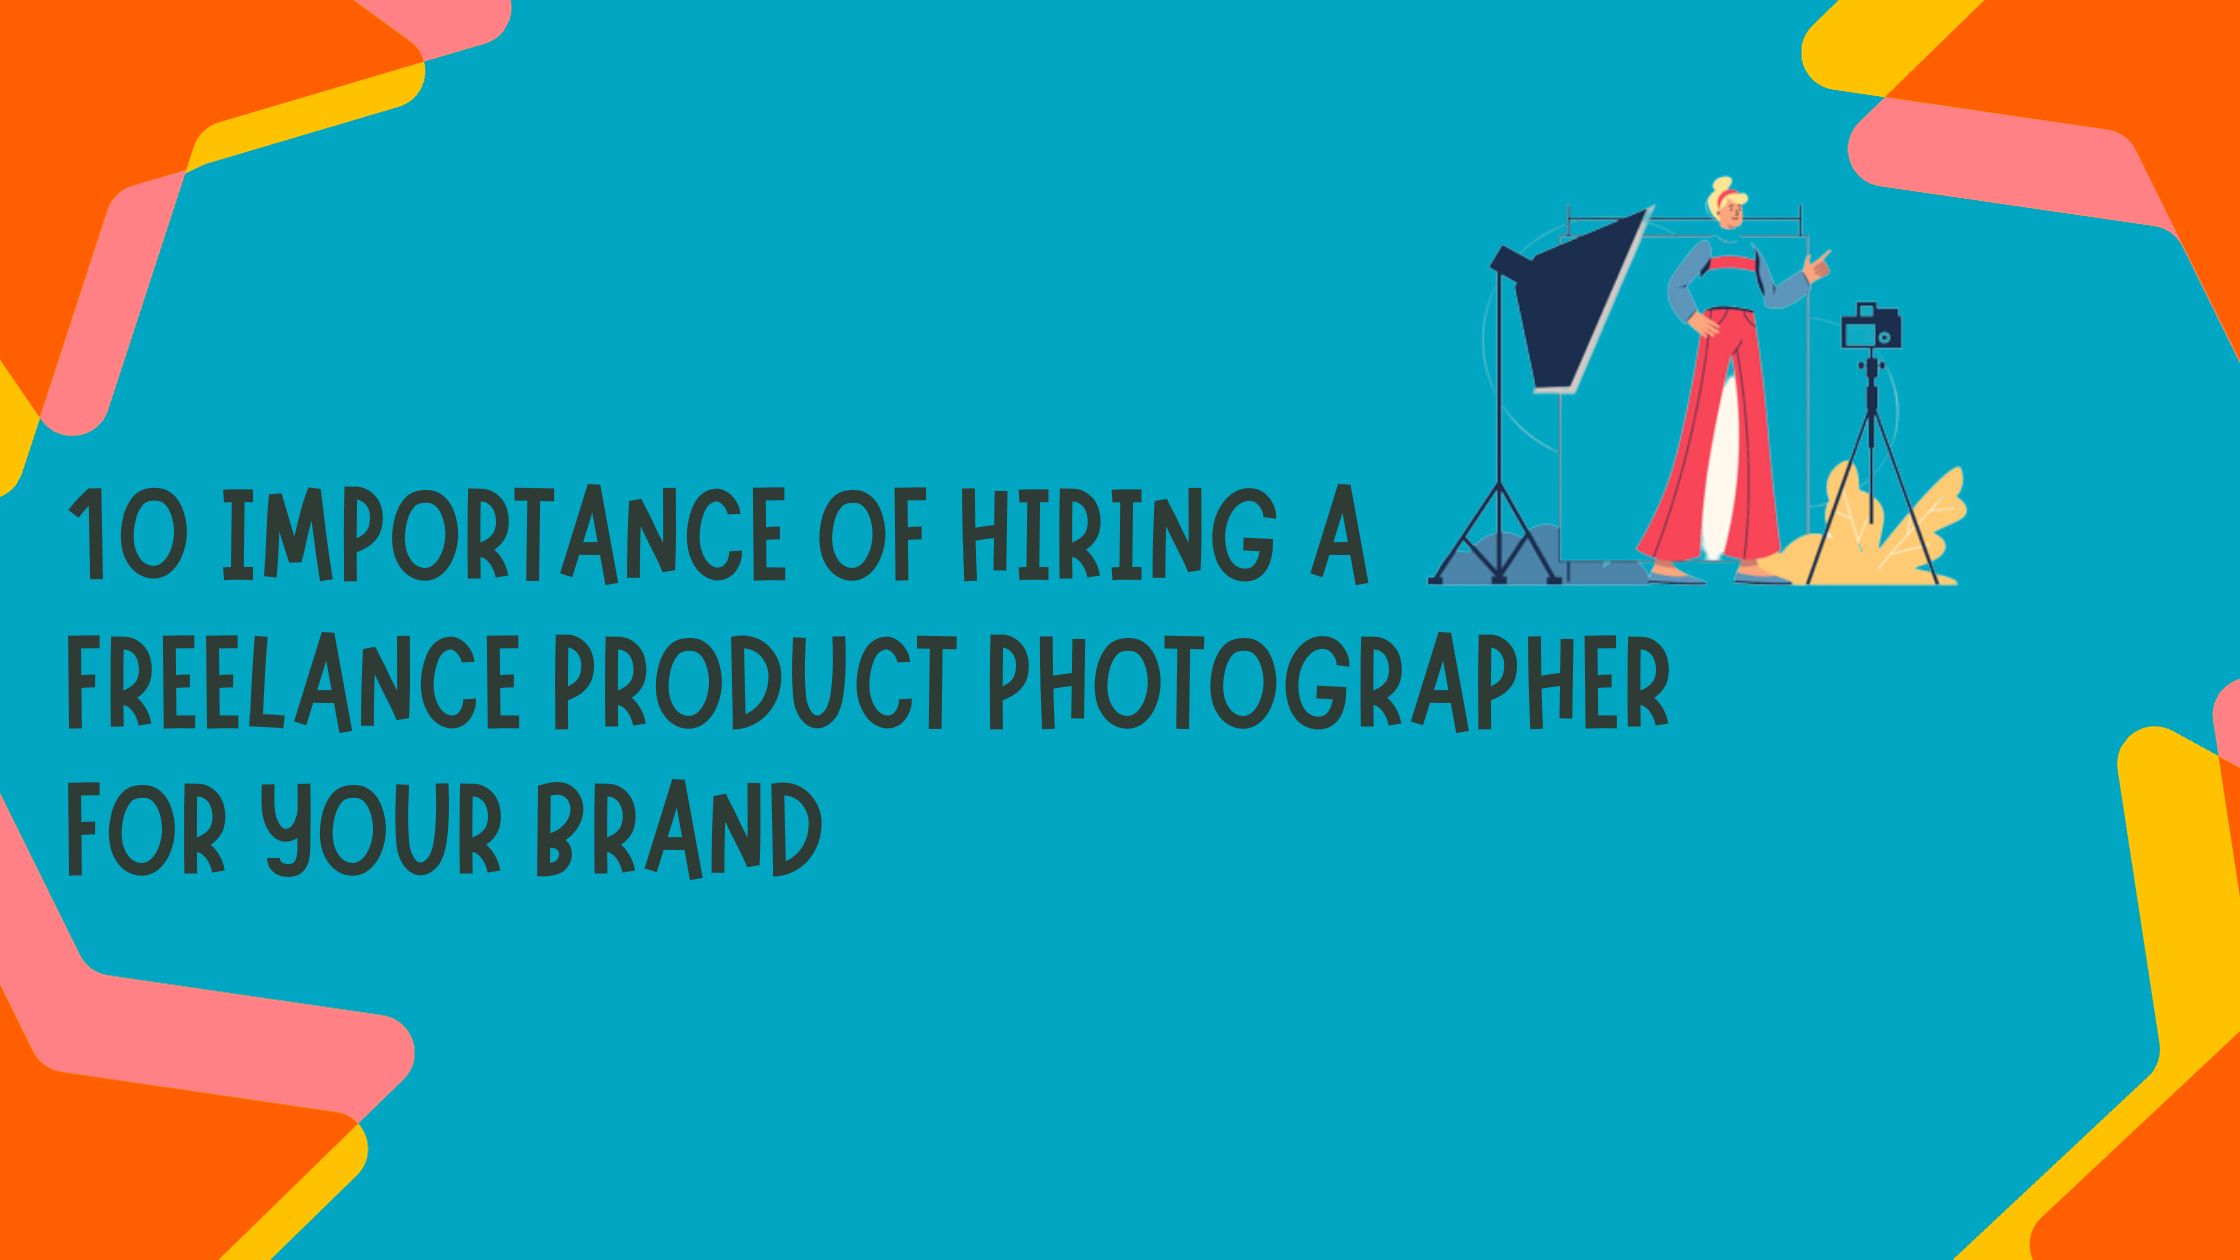 10 Importance of Hiring a Freelance Product Photographer for Your Brand 